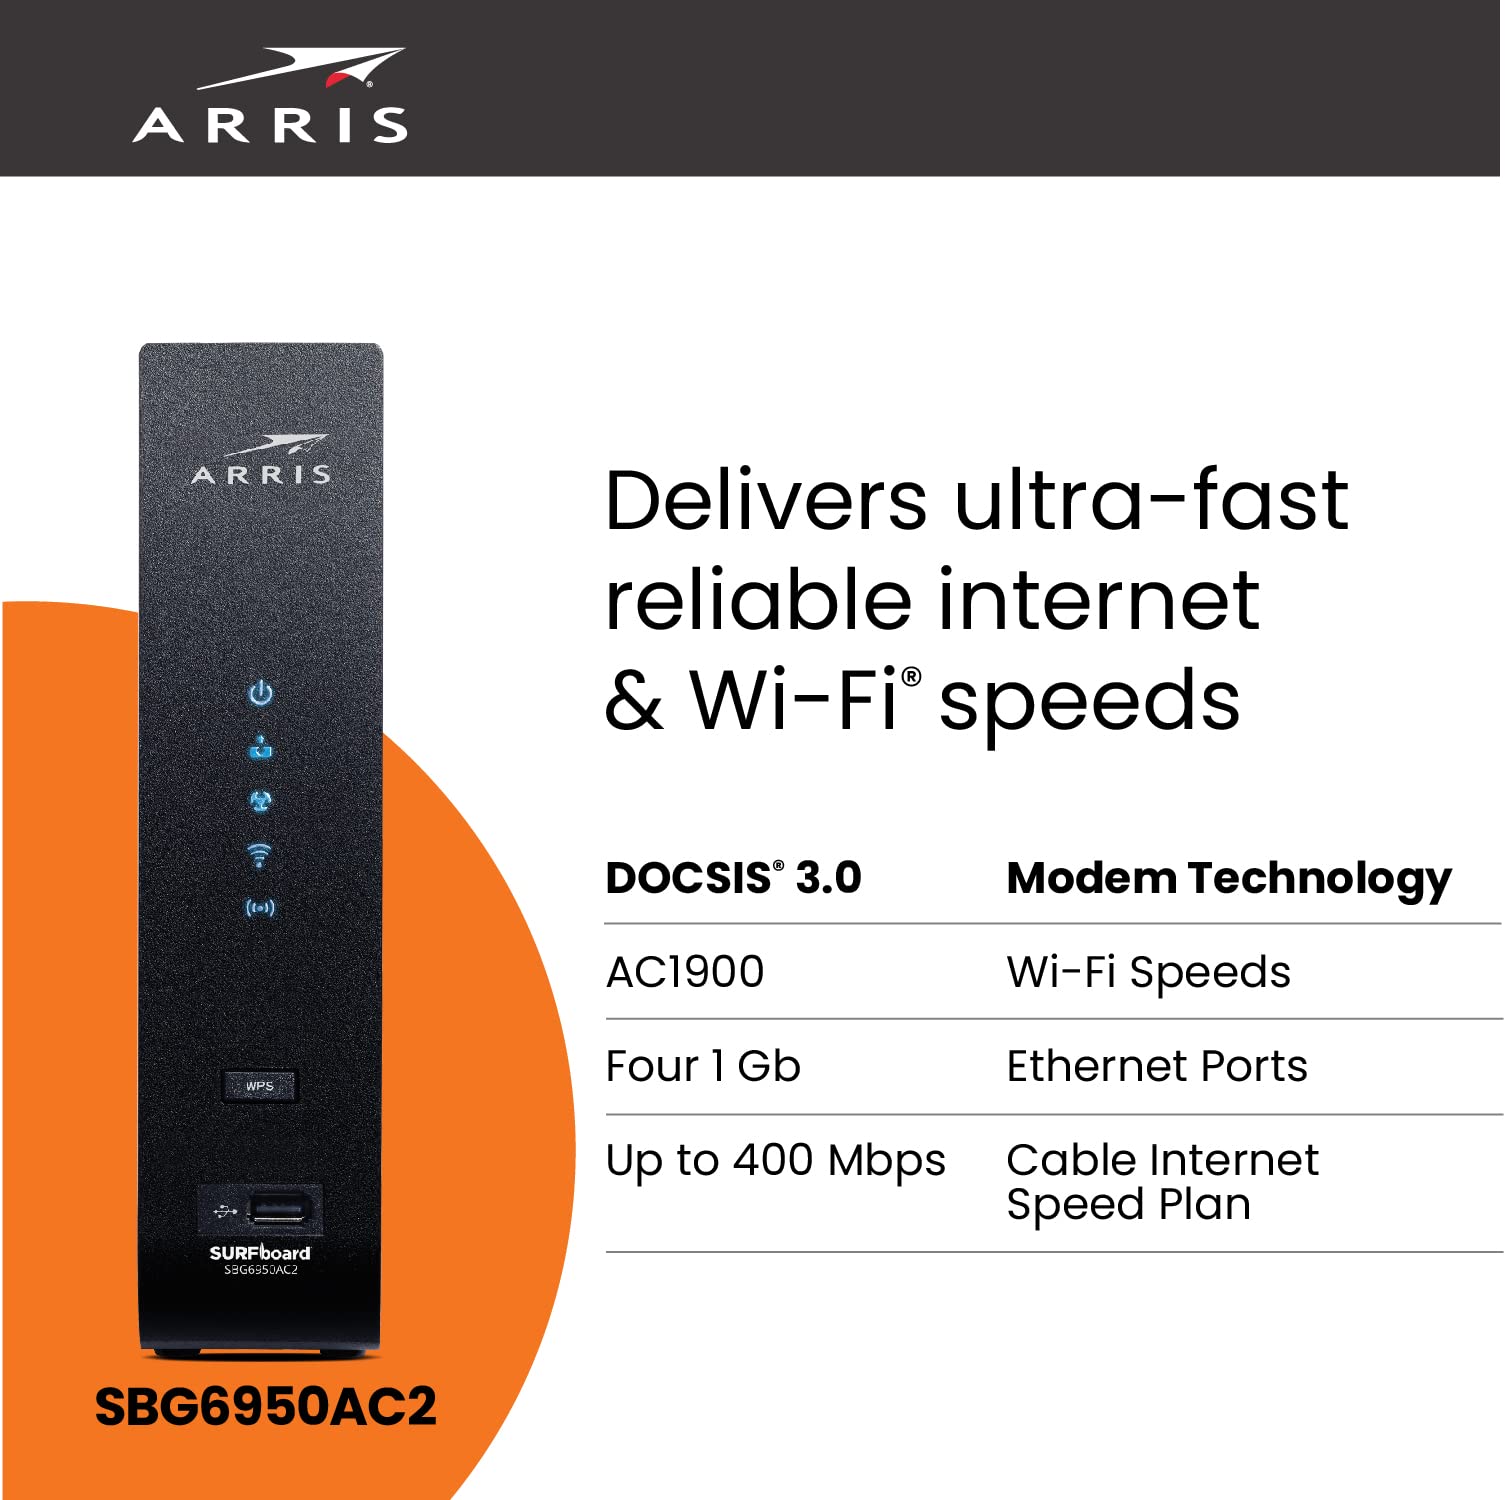 ARRIS Surfboard SBG6950AC2 DOCSIS 3.0 Cable Modem & AC1900 Wi-Fi Router | Approved for Comcast Xfinity, Cox, Charter Spectrum & more | Four 1 Gbps Ports | 400 Mbps Max Internet Speeds 2 Year Warranty